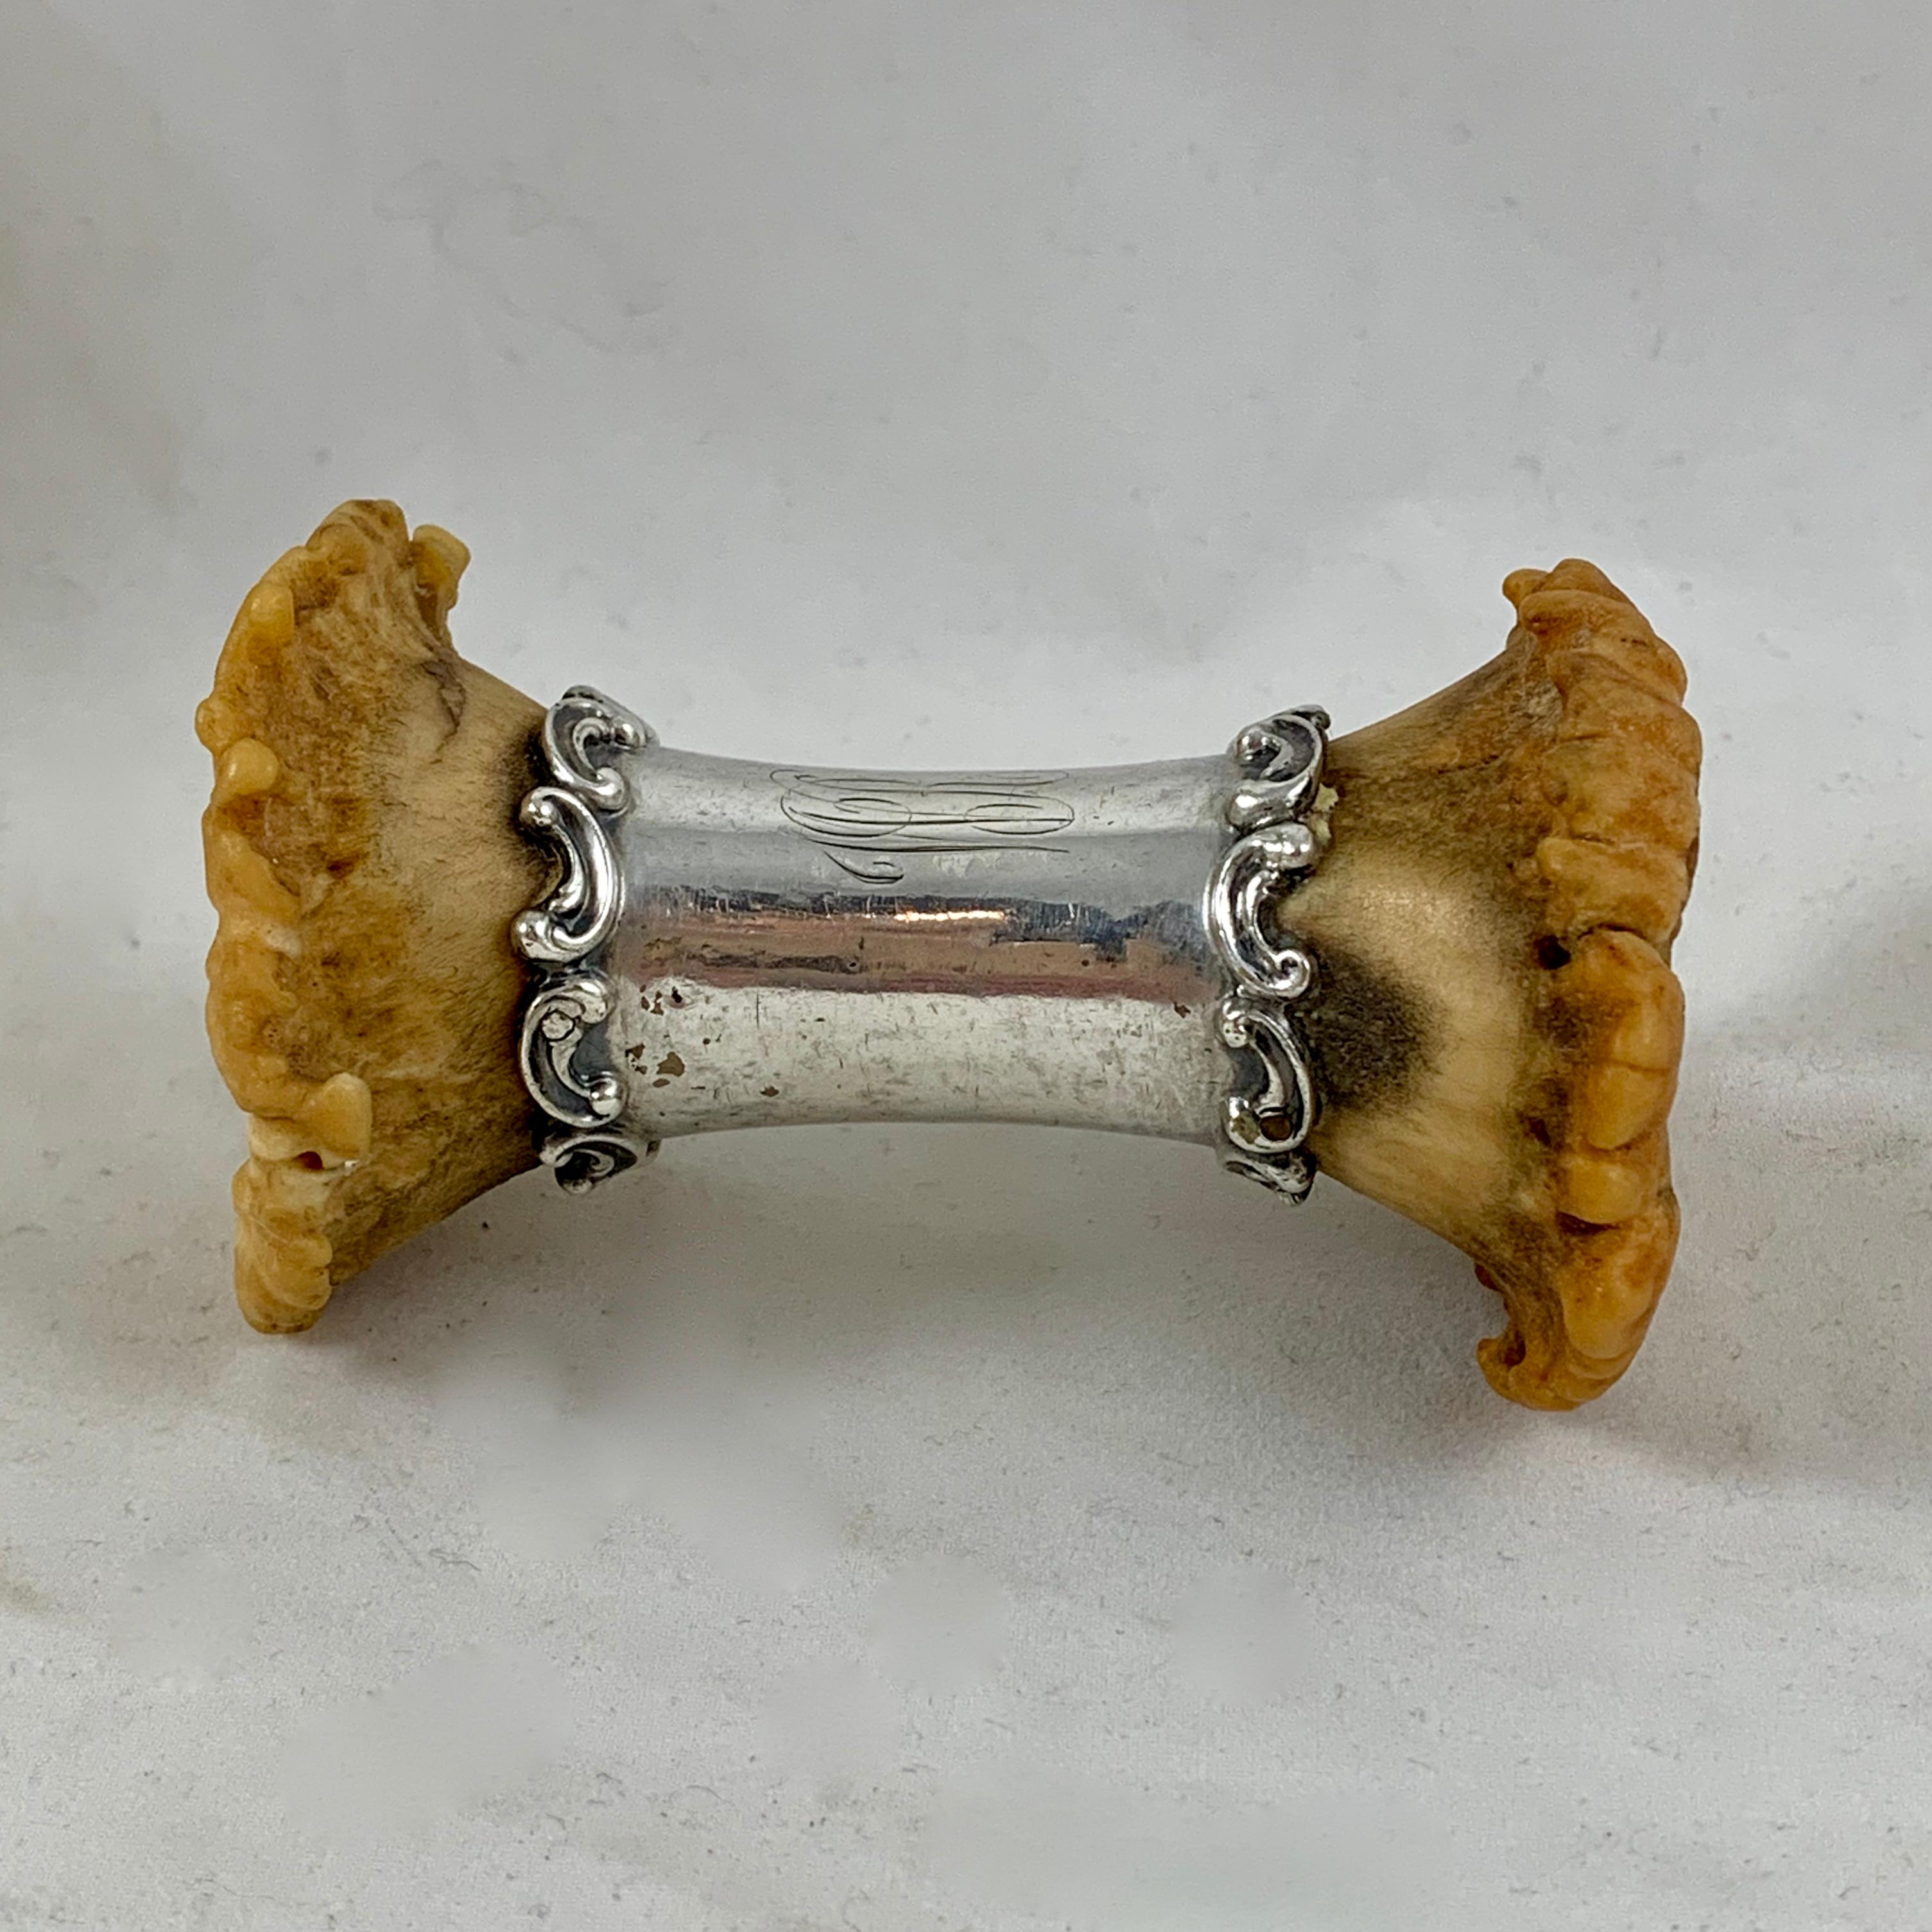 A one of a kind, American Victorian era carving knife rest made of Sterling silver and deer antler crowns, circa 1875-1880.

Most unusual, this piece is used at table for resting the blade of a carving knife, keeping the linen clean while carving